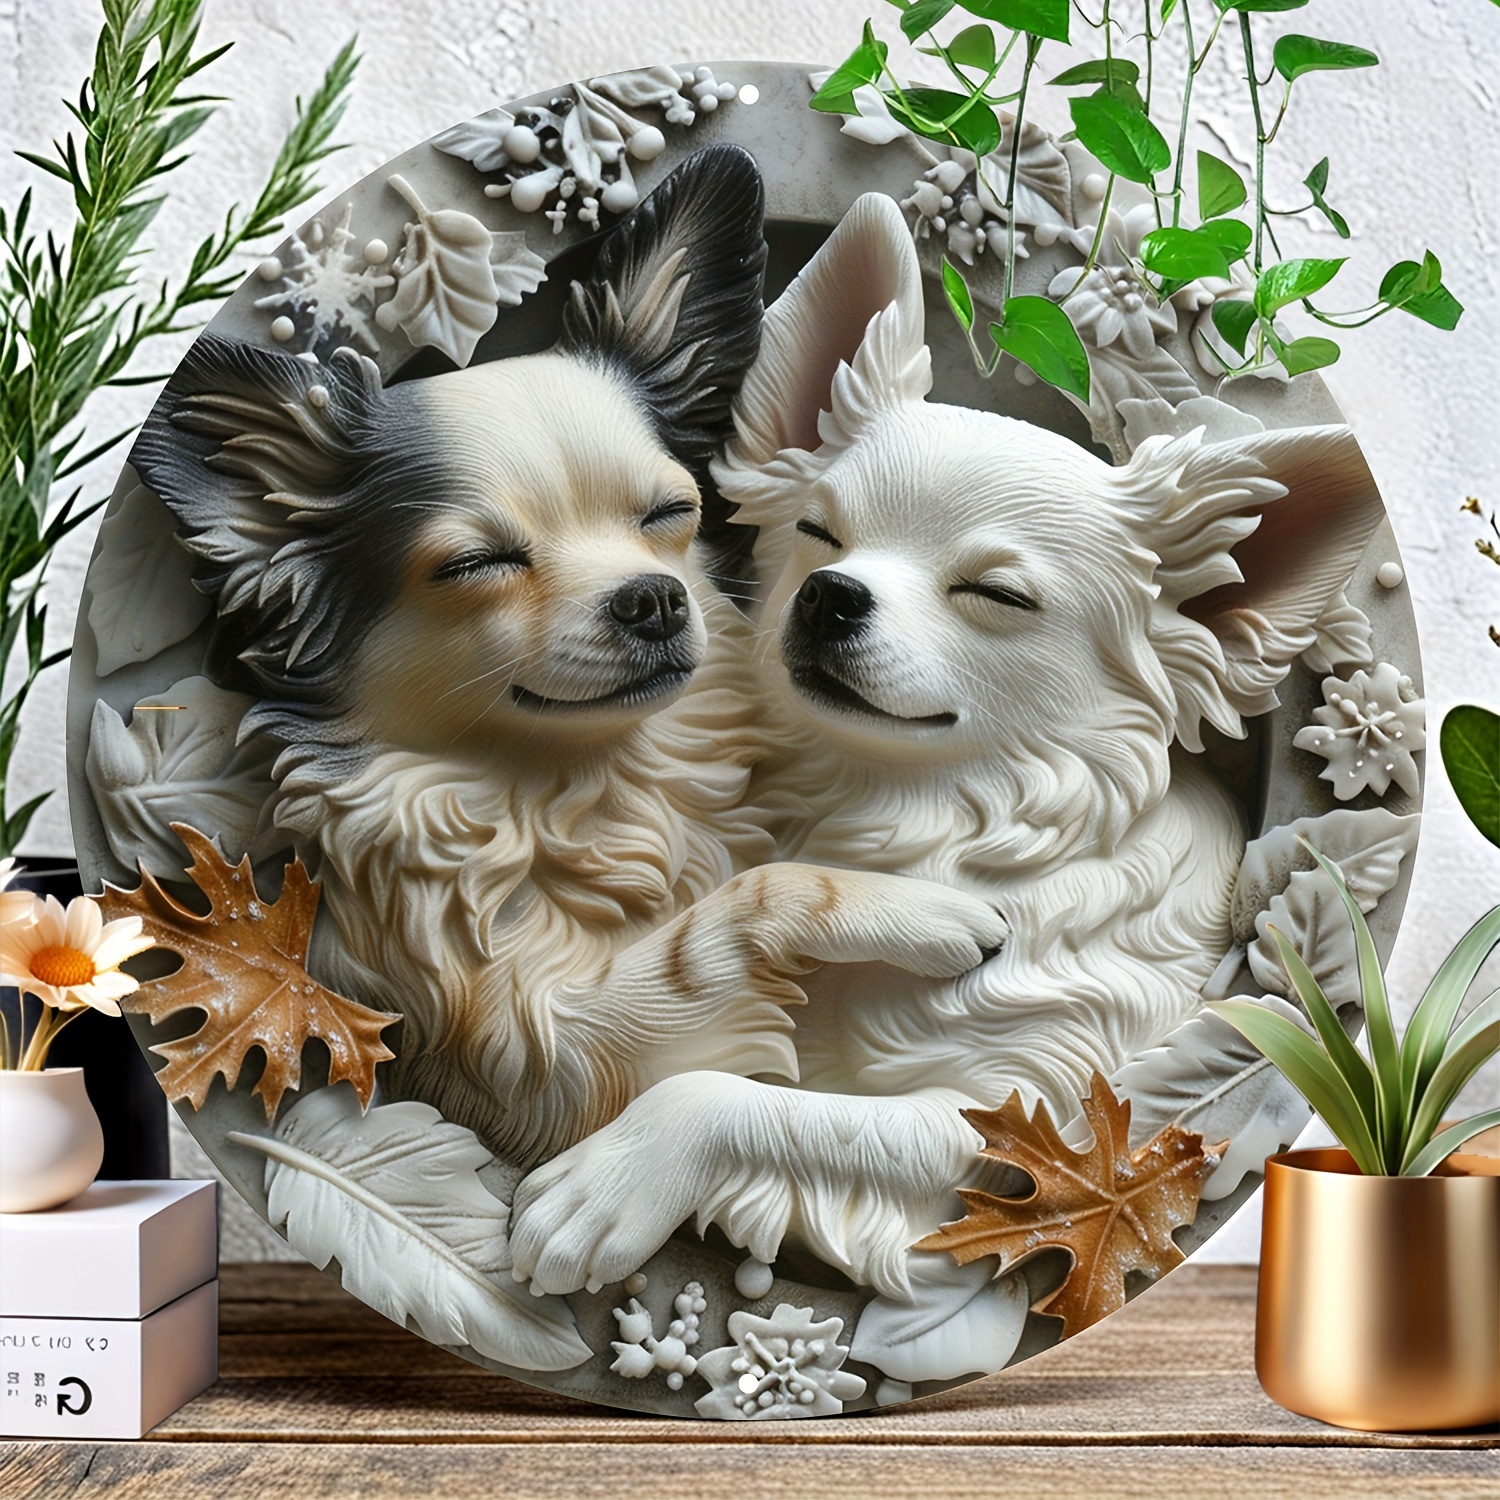 

1pc Creative Chihuahua Dog Aluminum Art - 8 Inch Hd Vivid Print - Durable, Weatherproof Home Decor For Homes, Living Spaces And Memorable Pet Gifts